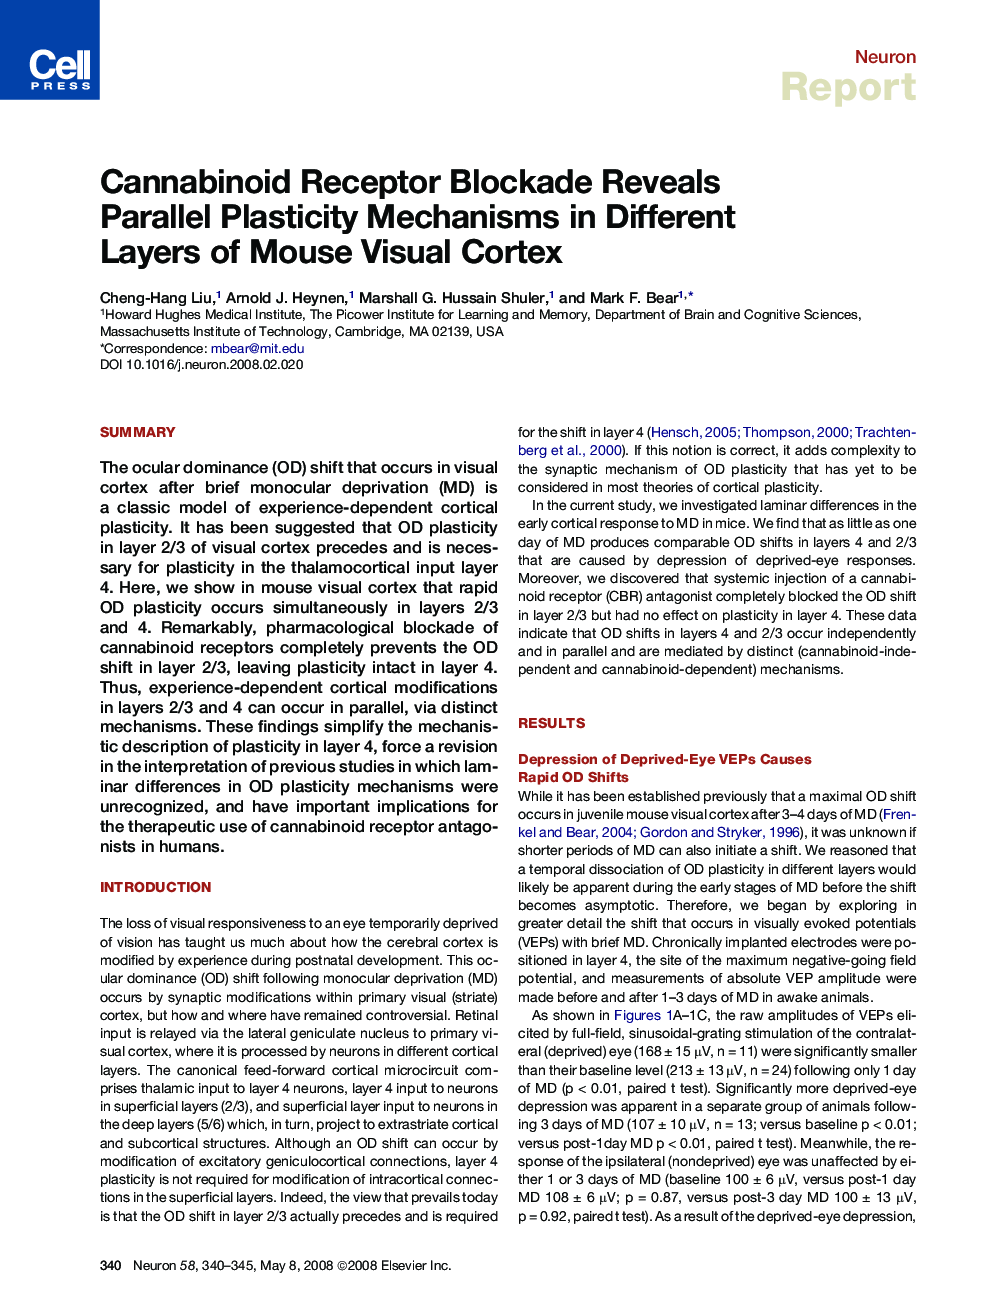 Cannabinoid Receptor Blockade Reveals Parallel Plasticity Mechanisms in Different Layers of Mouse Visual Cortex